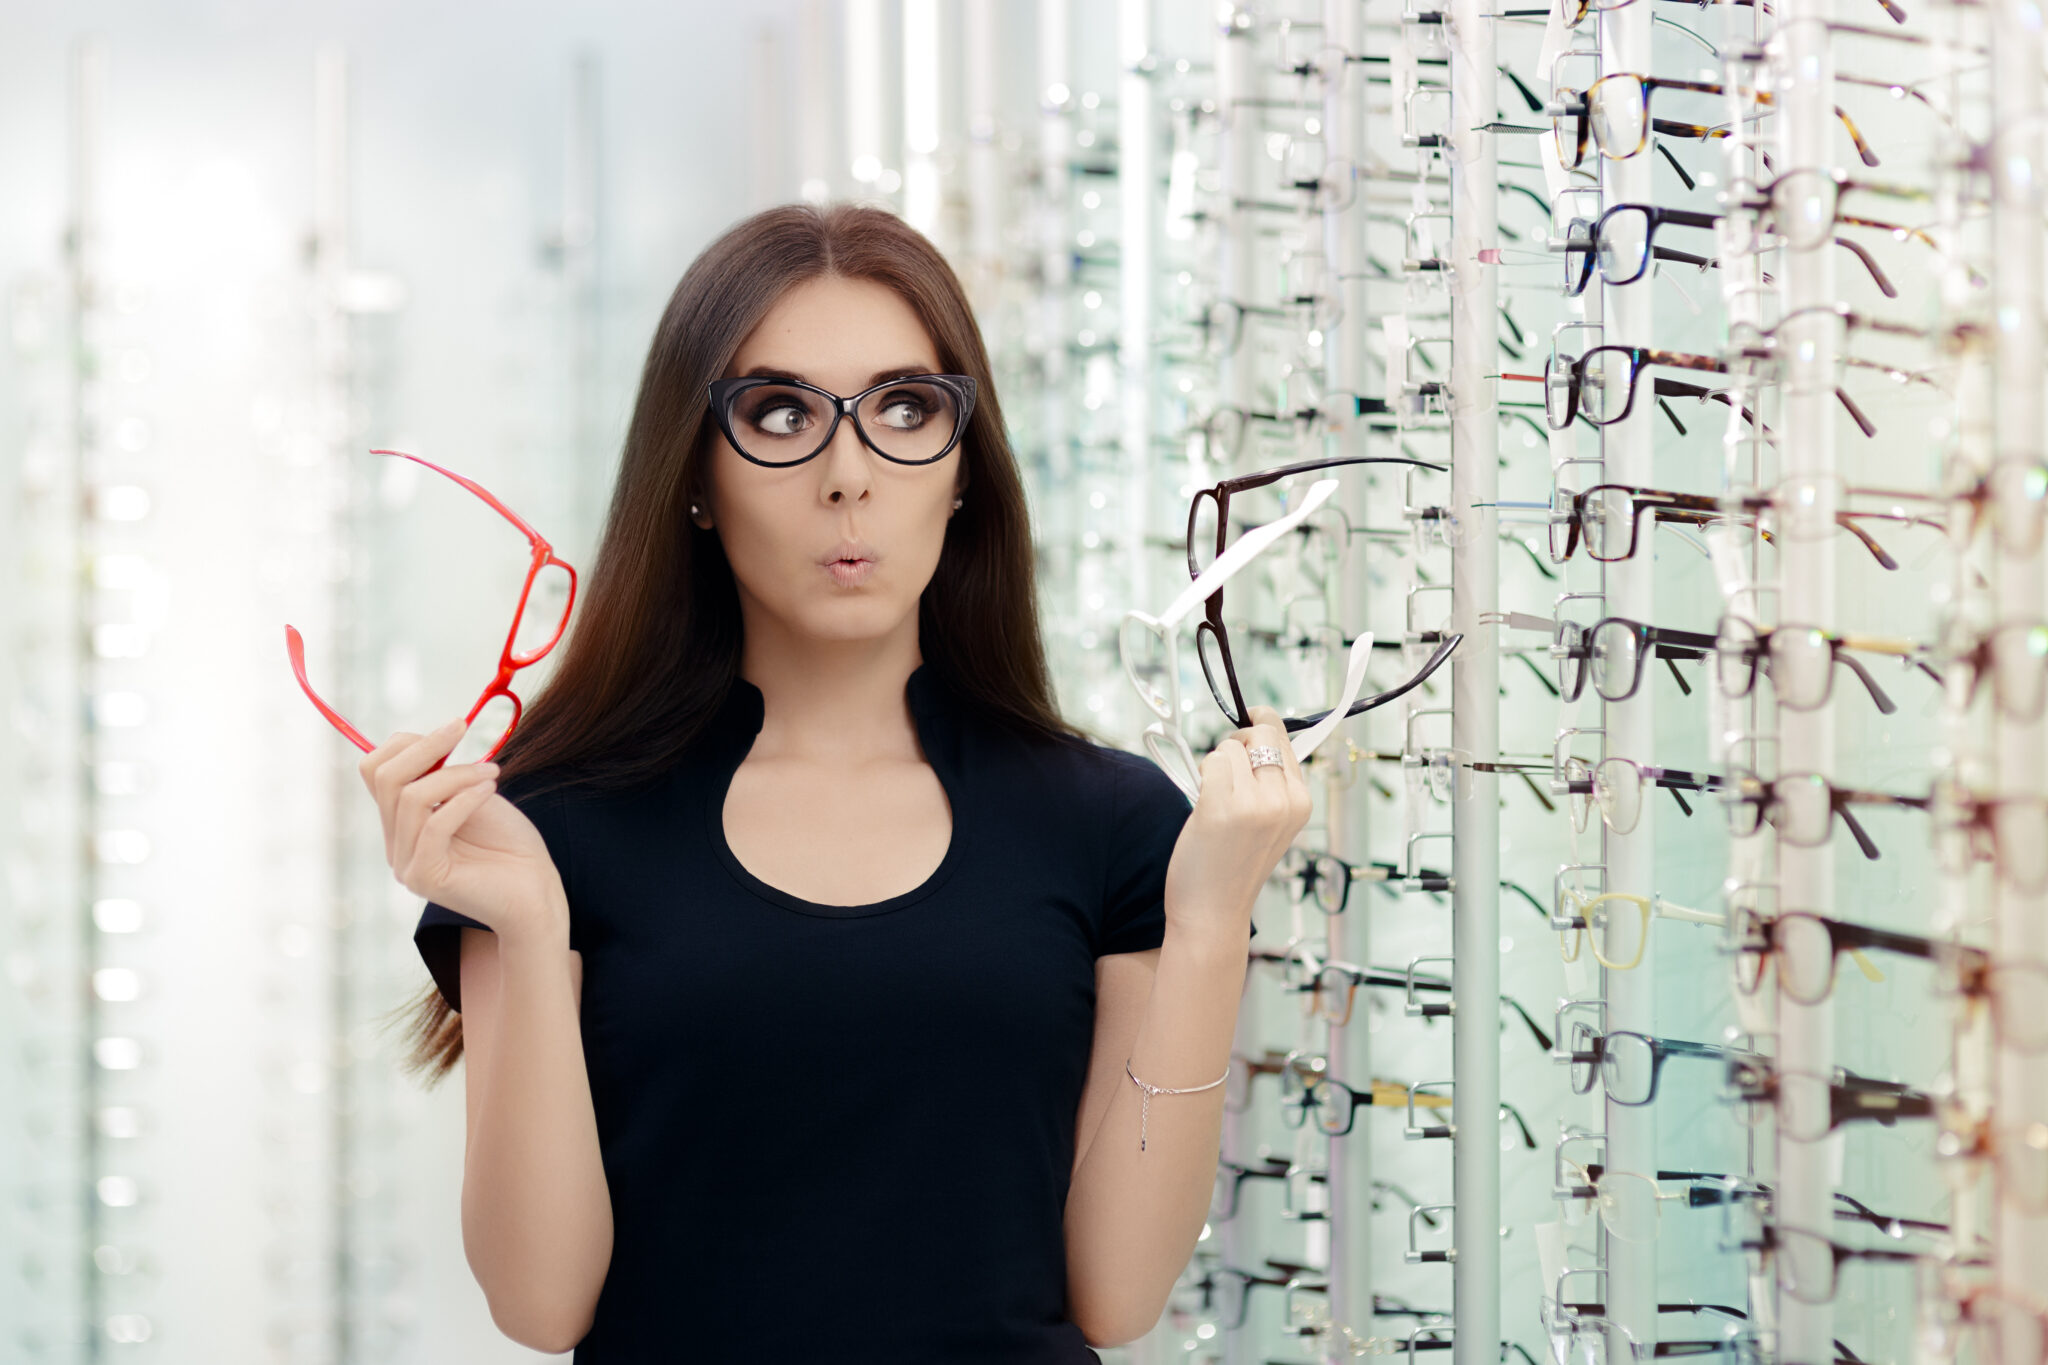 How Much Does an Eye Exam Cost at Walmart? Blog